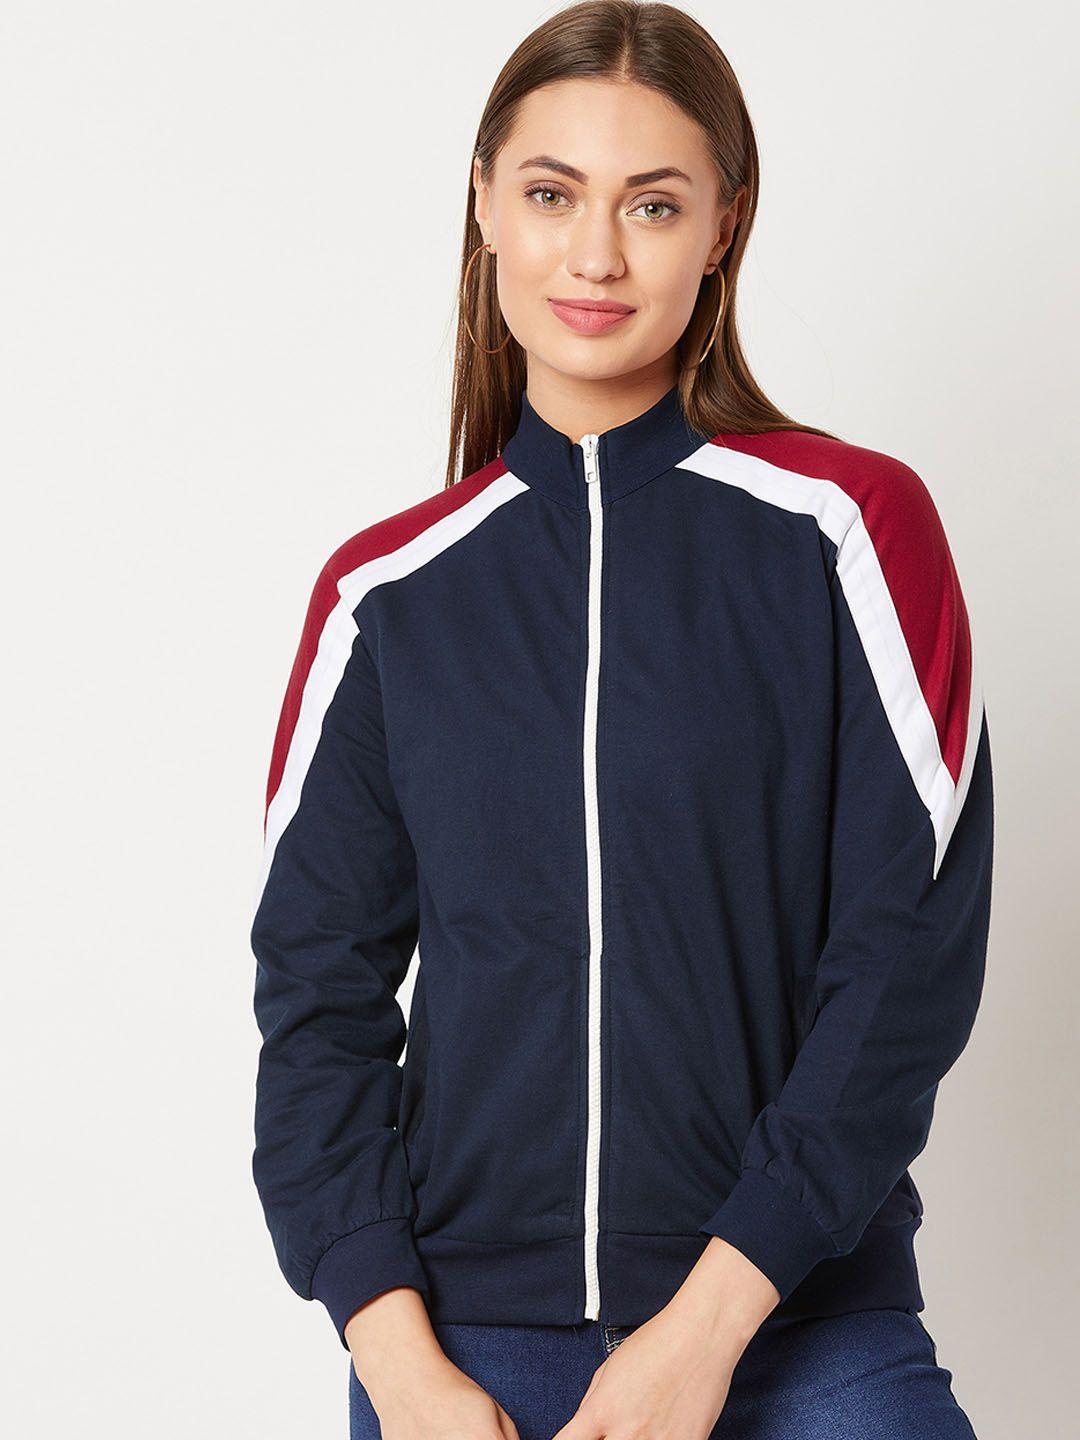 miss-chase-women-navy-blue-&-red-colourblocked-jacket